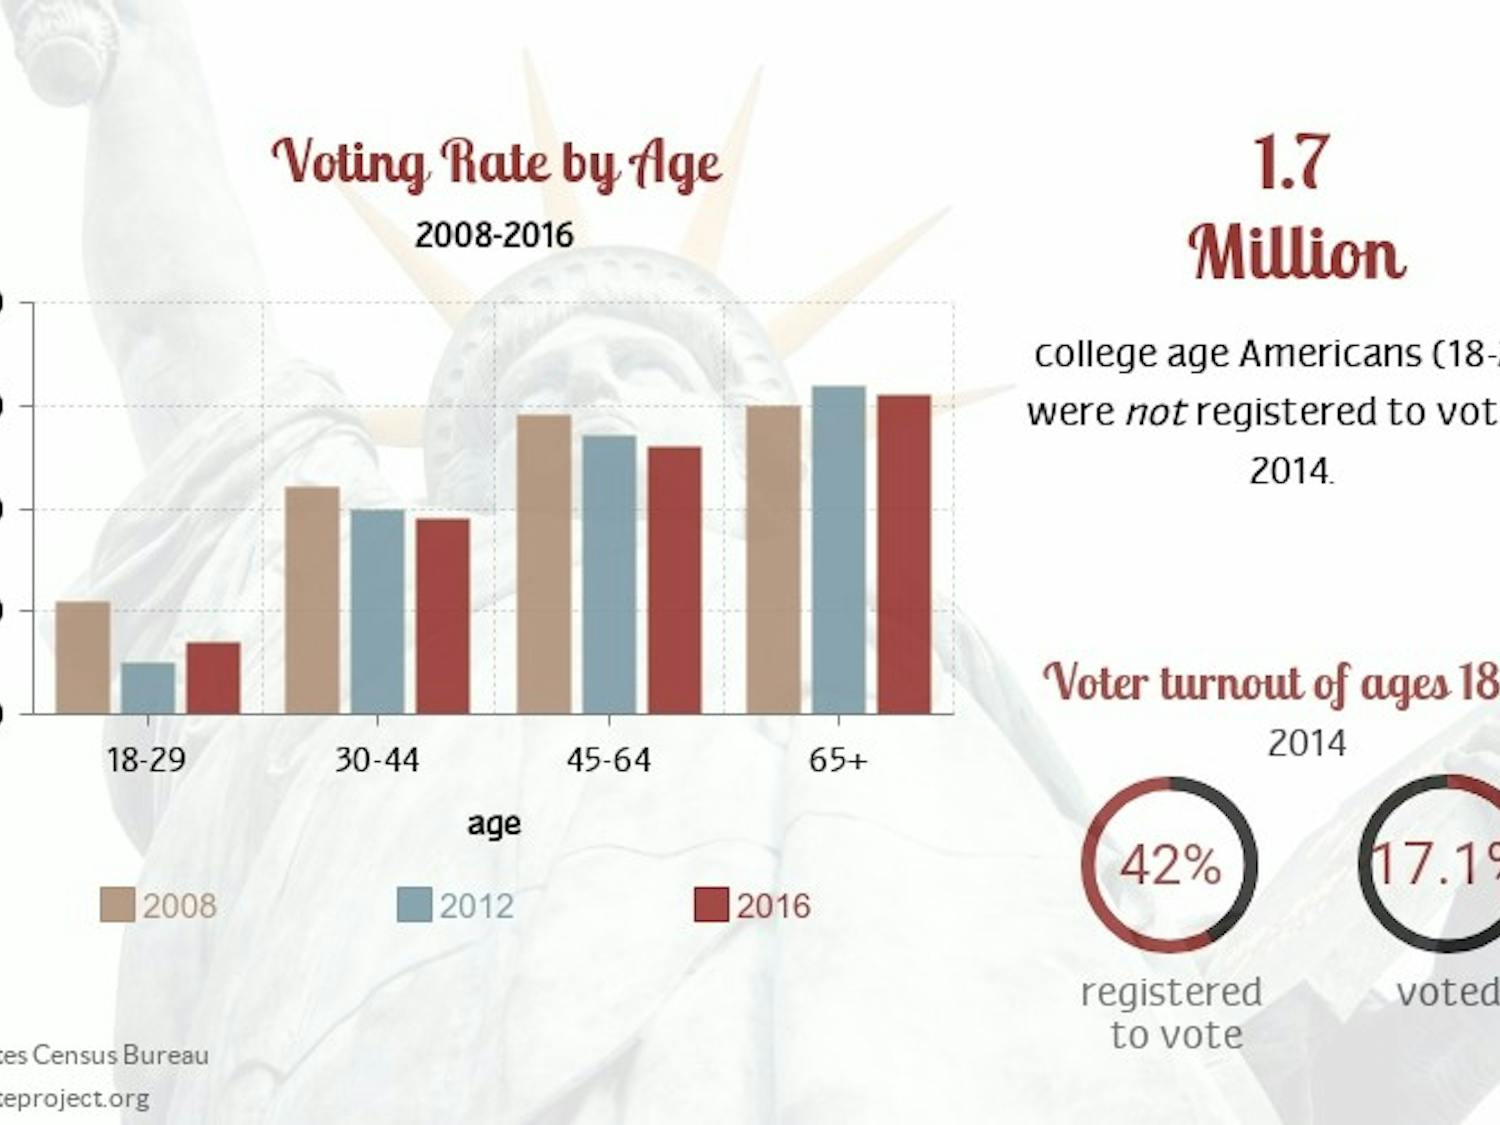 Voter turnout among college students